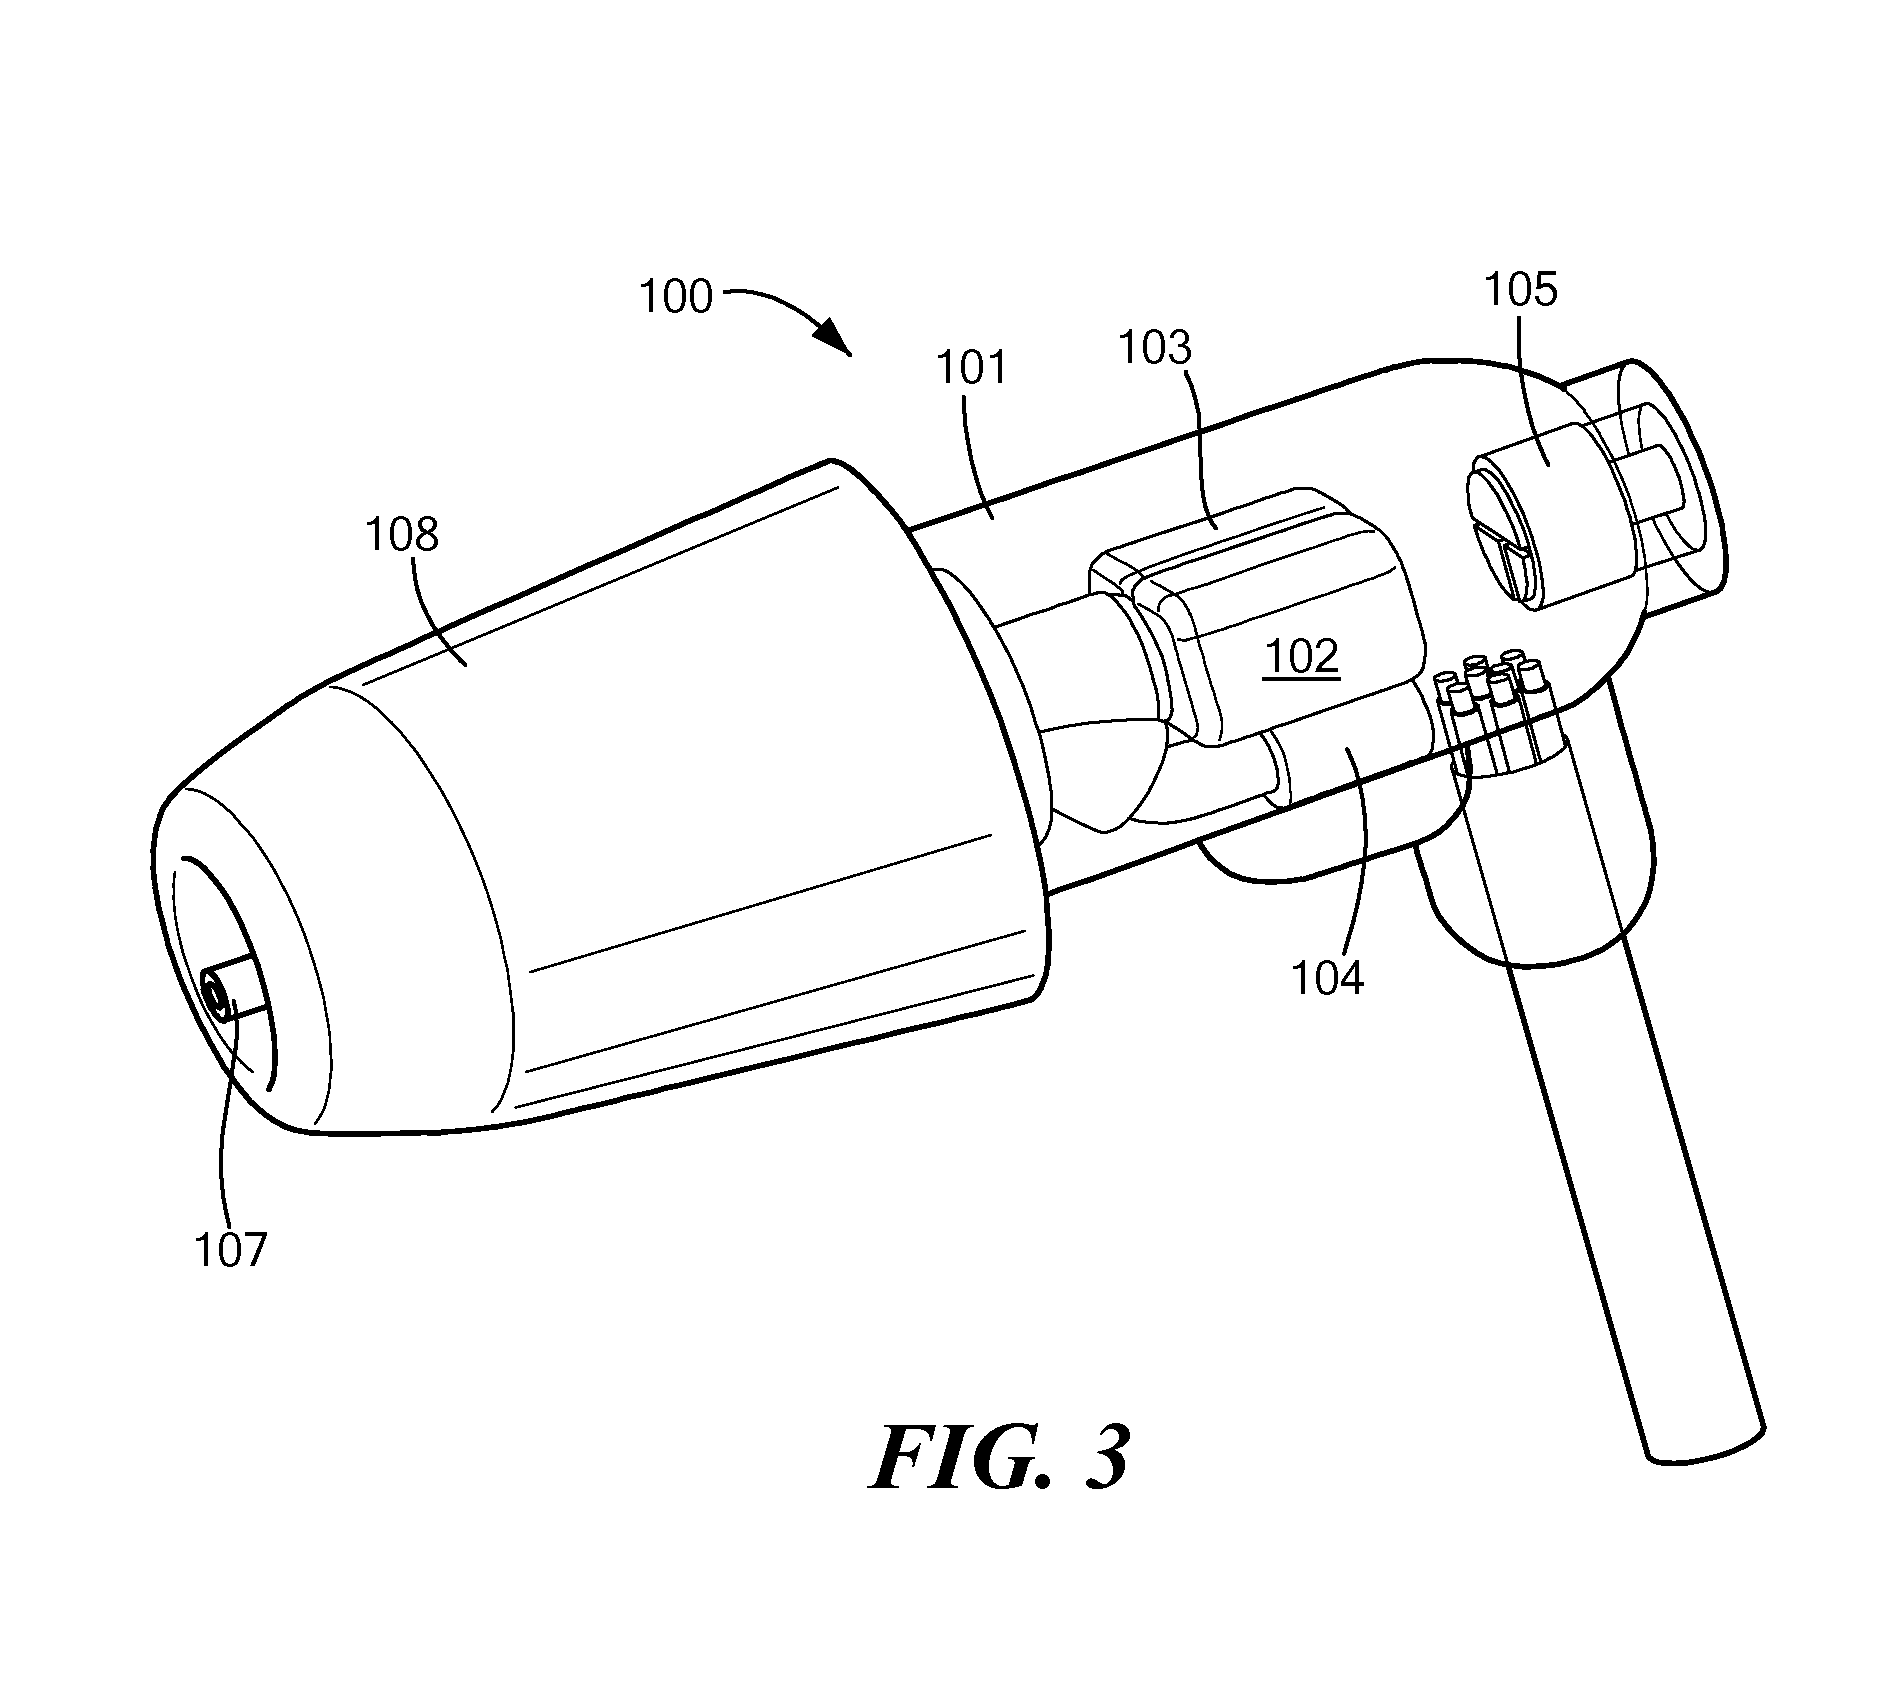 In-Ear Digital Electronic Noise Cancelling and Communication Device